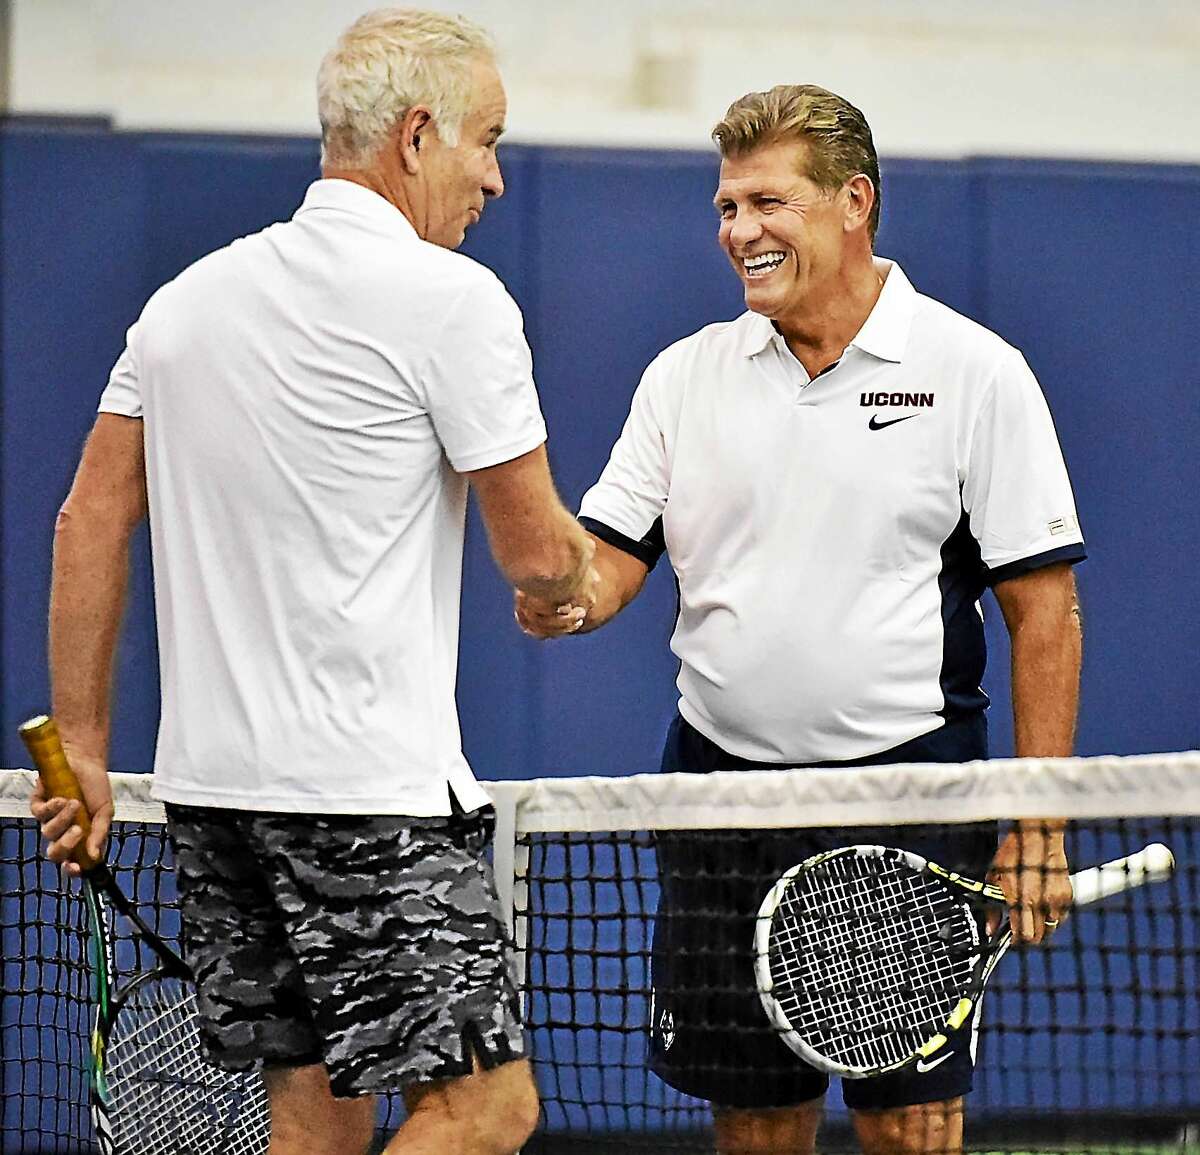 UConn women’s basketball coach Geno Auriemma greets John McEnroe at the net following their match at the Cullman-Heyman Tennis Center at the Connecticut Open on Friday in New Haven.